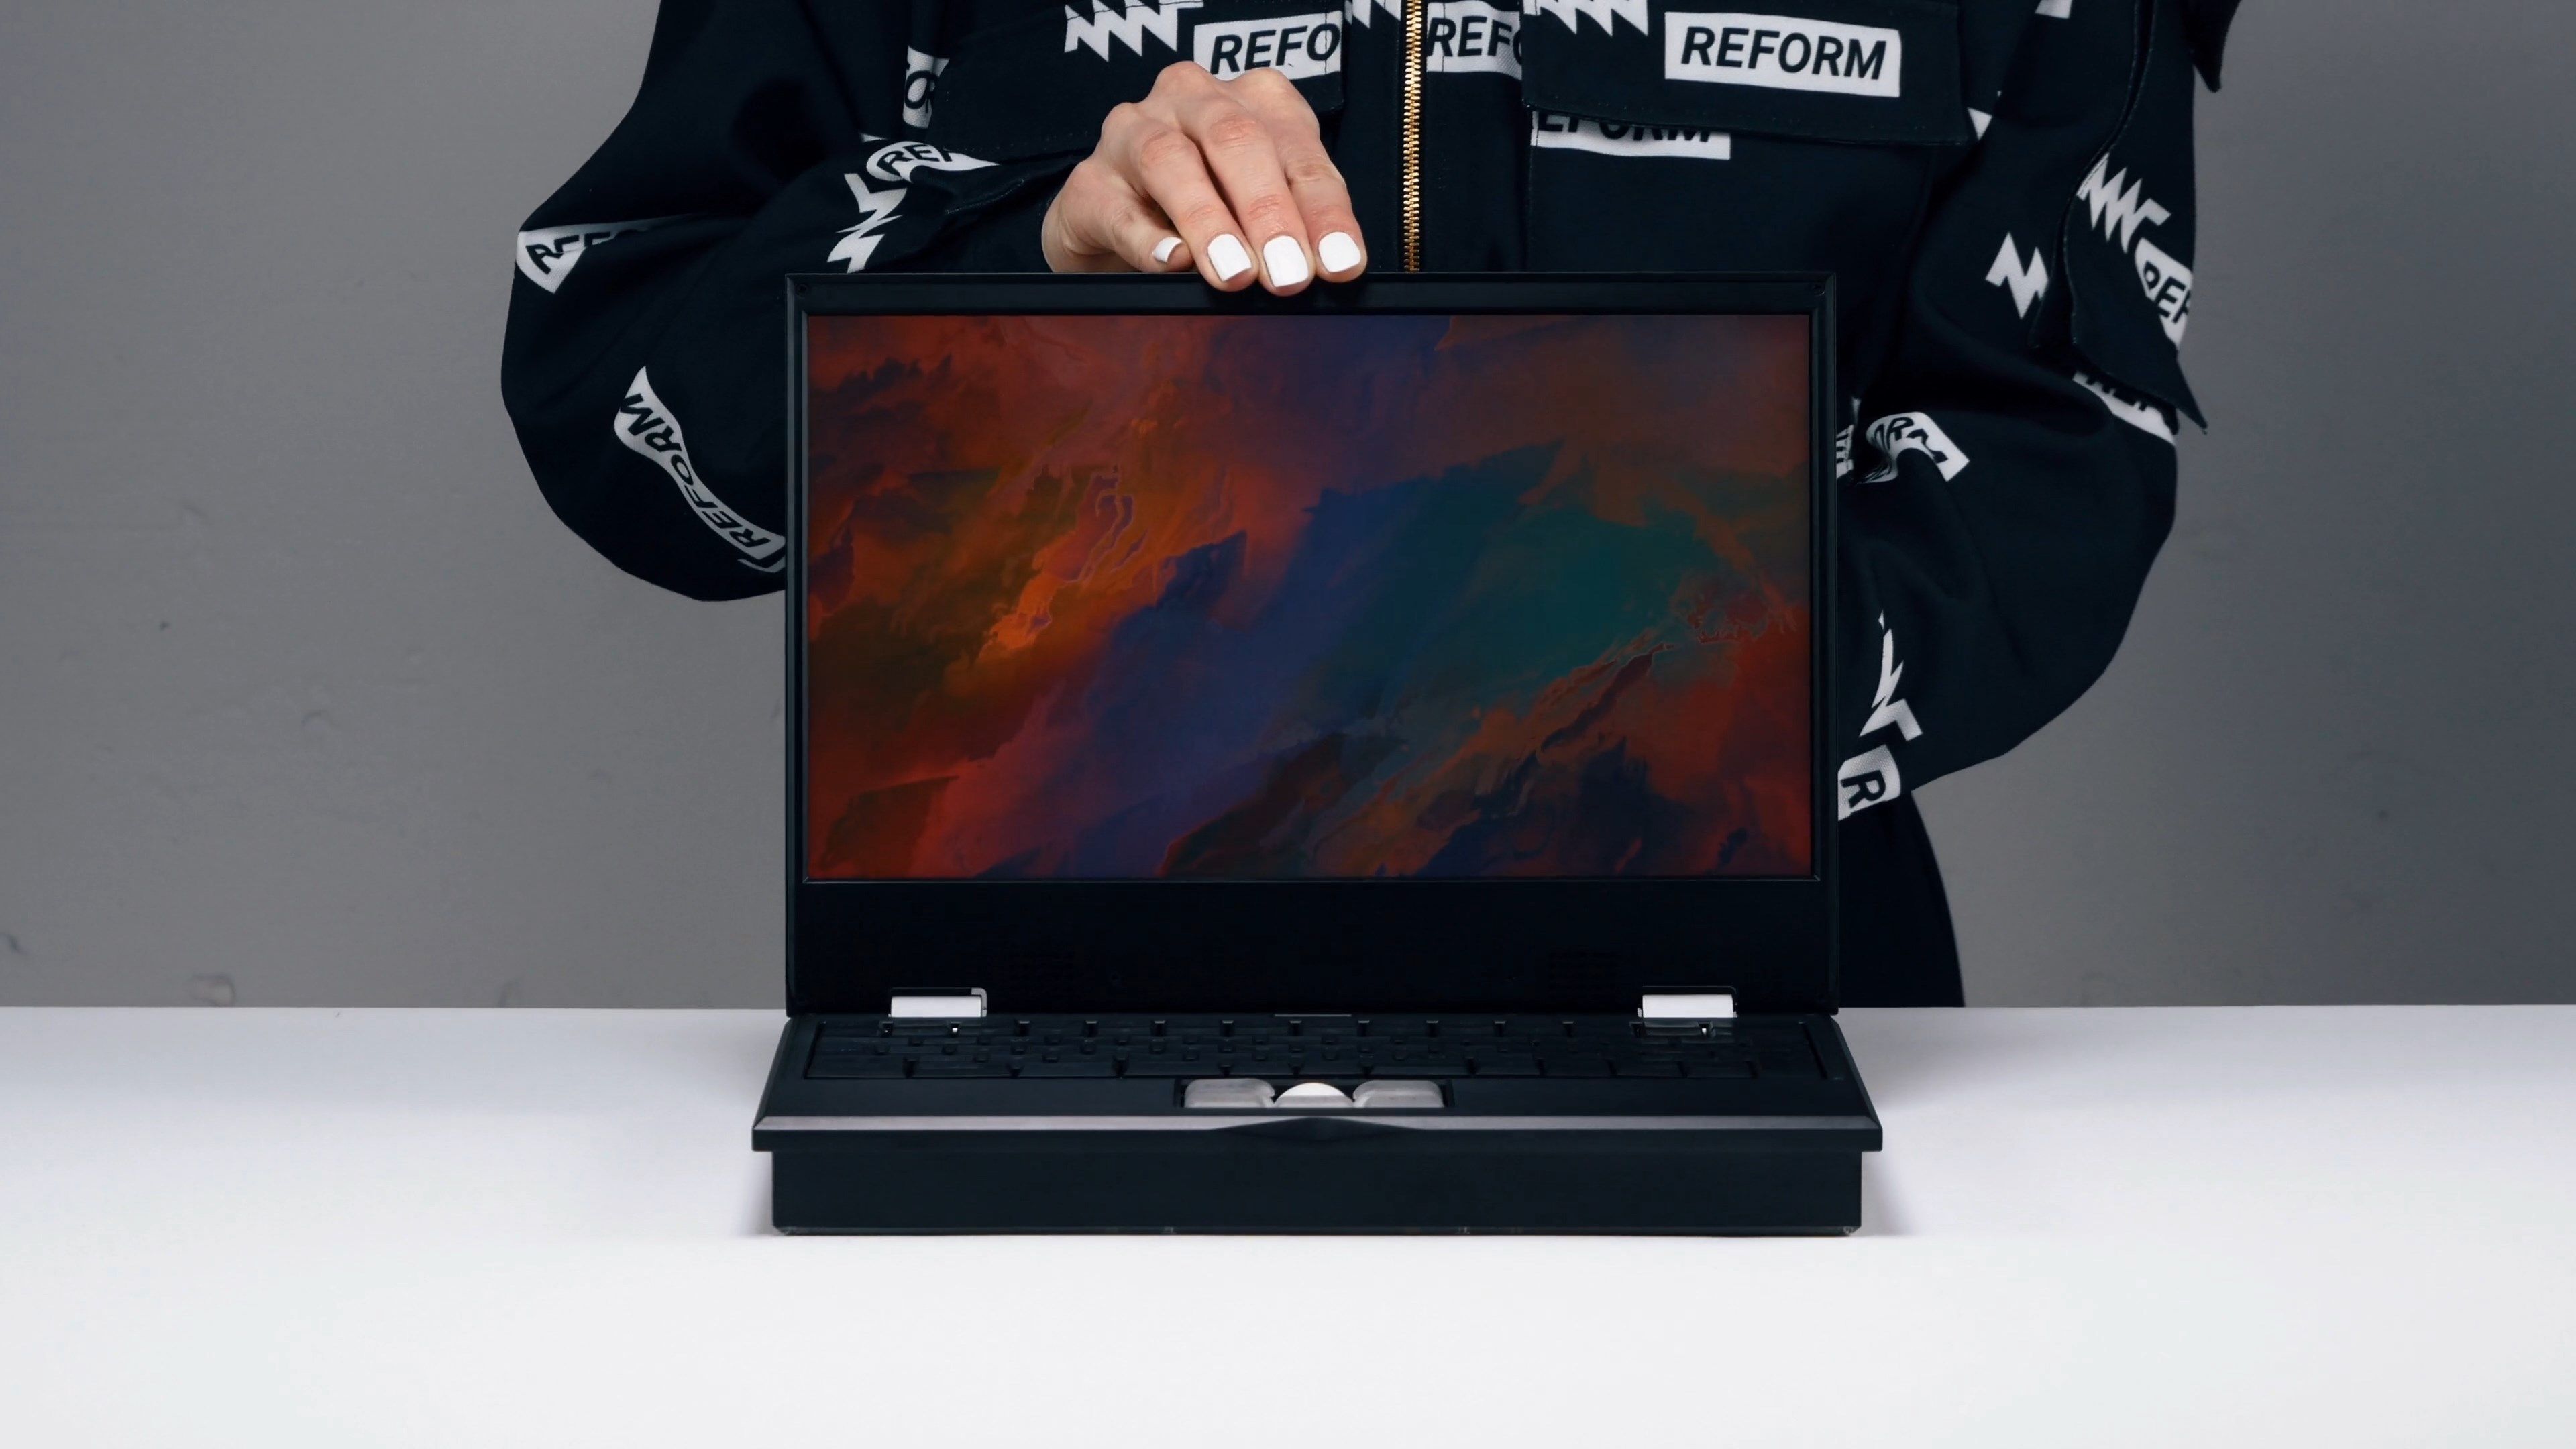 How a Modular Laptop Could Be the Best Way to Build Your Own